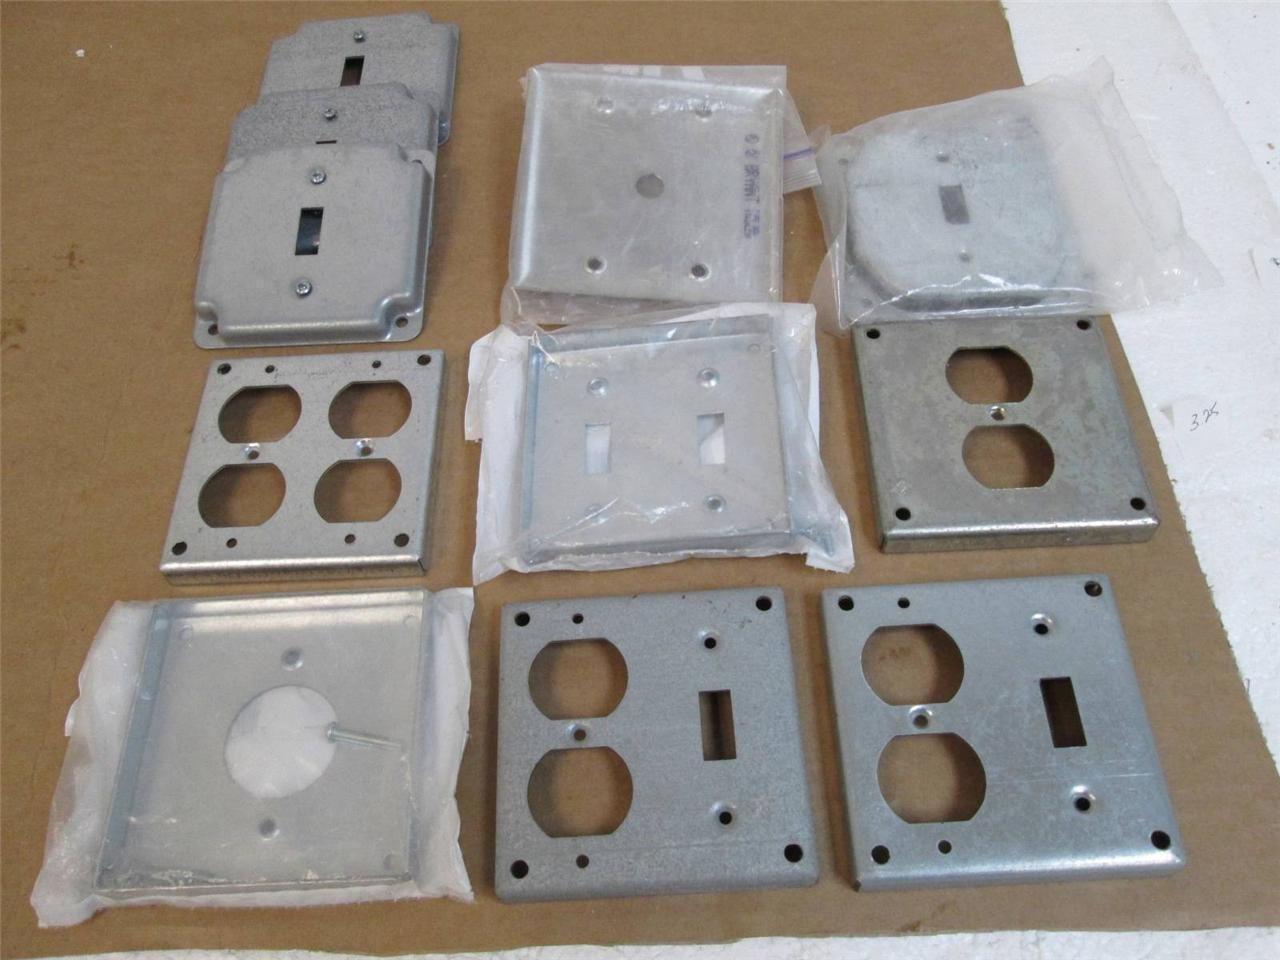 Lot of 11 Miscellaneous Mixed Square Box Outlet Covers & Openings - Heavy Metal - $34.90